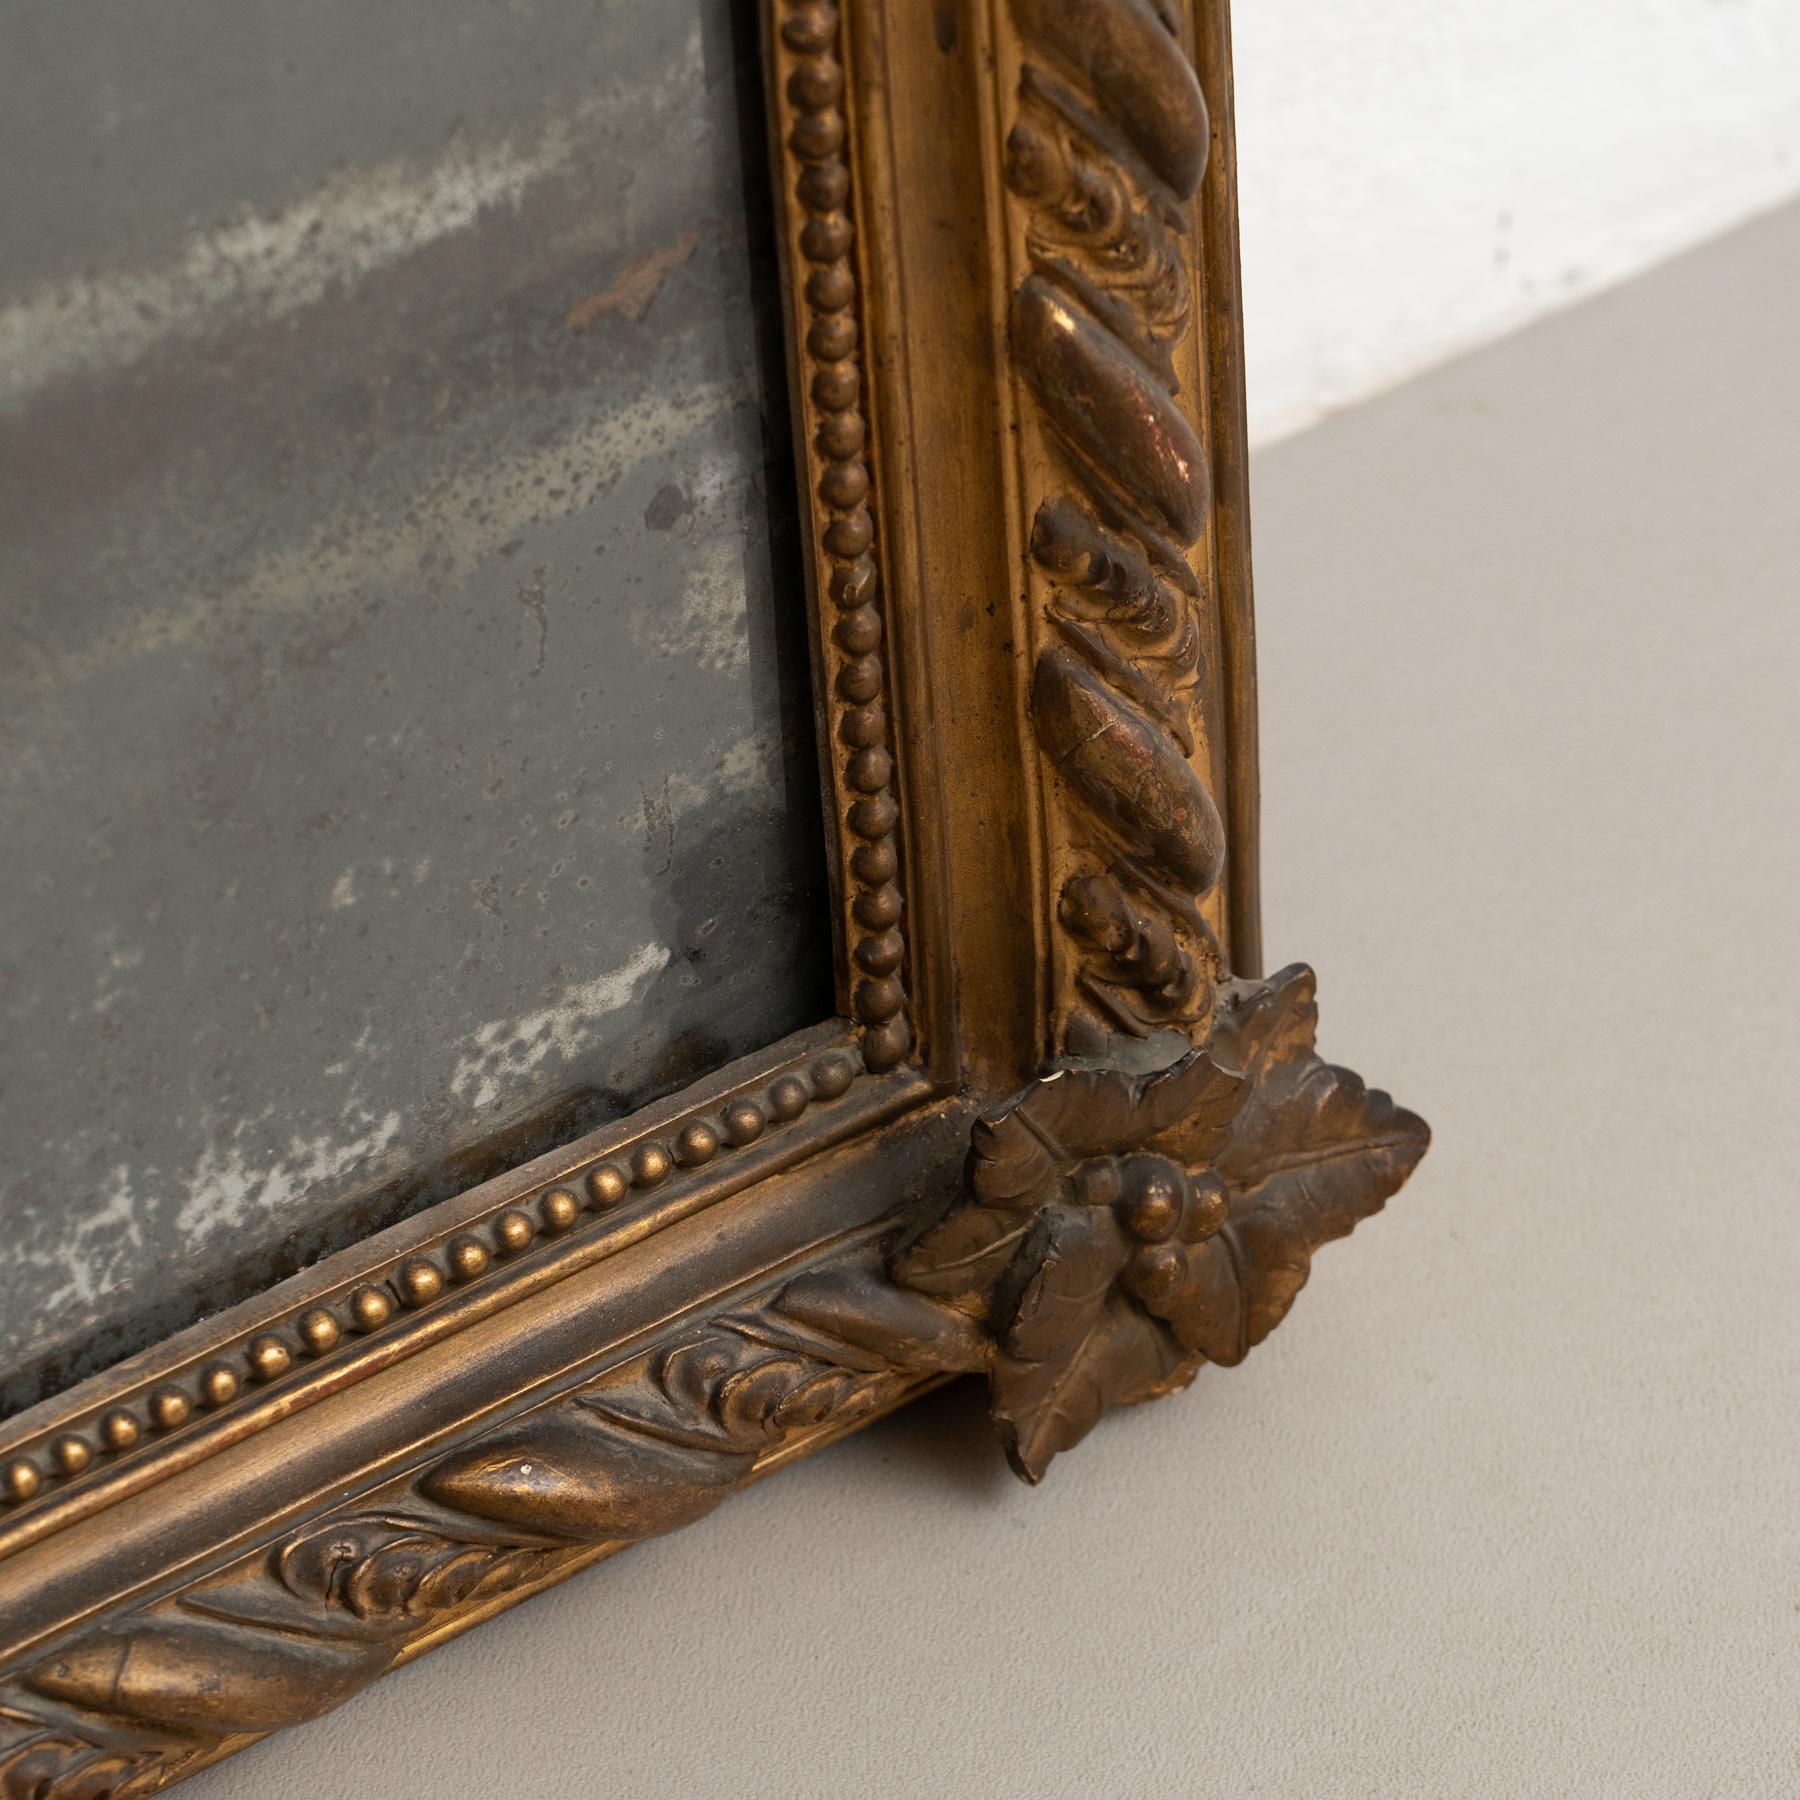 Antique Napoleon III Style Gilded Wood and Stucco Mirror, Early 20th Century For Sale 4